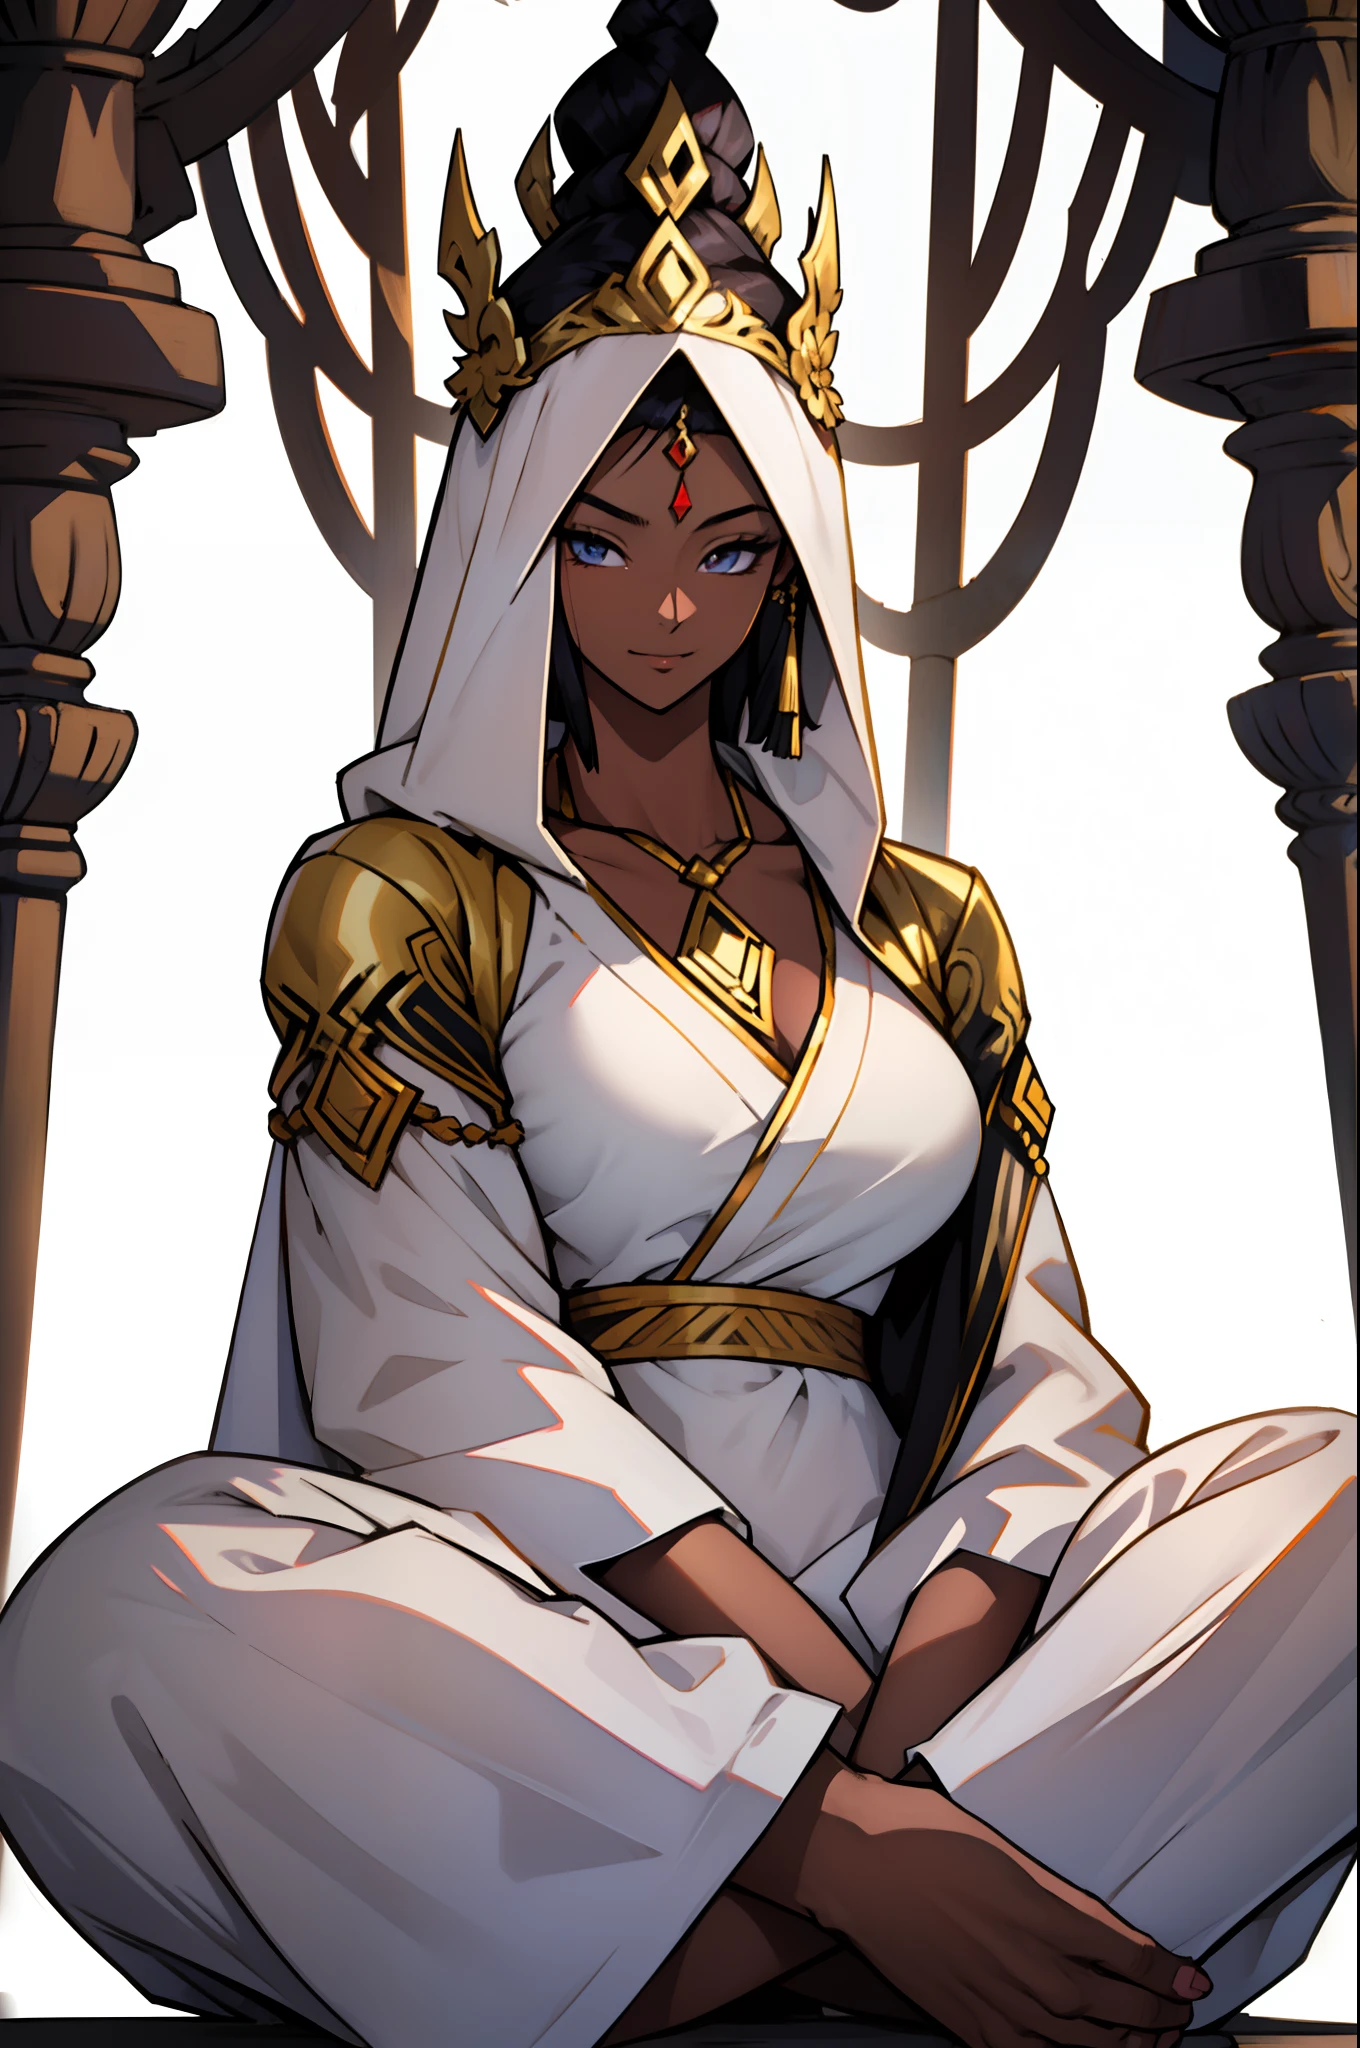 anime style, Southeast Asian, Khmer woman, woman, Khmer, Cambodian, hindu style, spiritual goddess, deity, full body from head to toe, dark chocolate skin tone, hair all down hairstyle, meditation position, seating position, prayer, wearing a grey long hoodie robe dress, white color hair, I want the picture to be complete and accurate, all pure white background scenery, "centered postition",